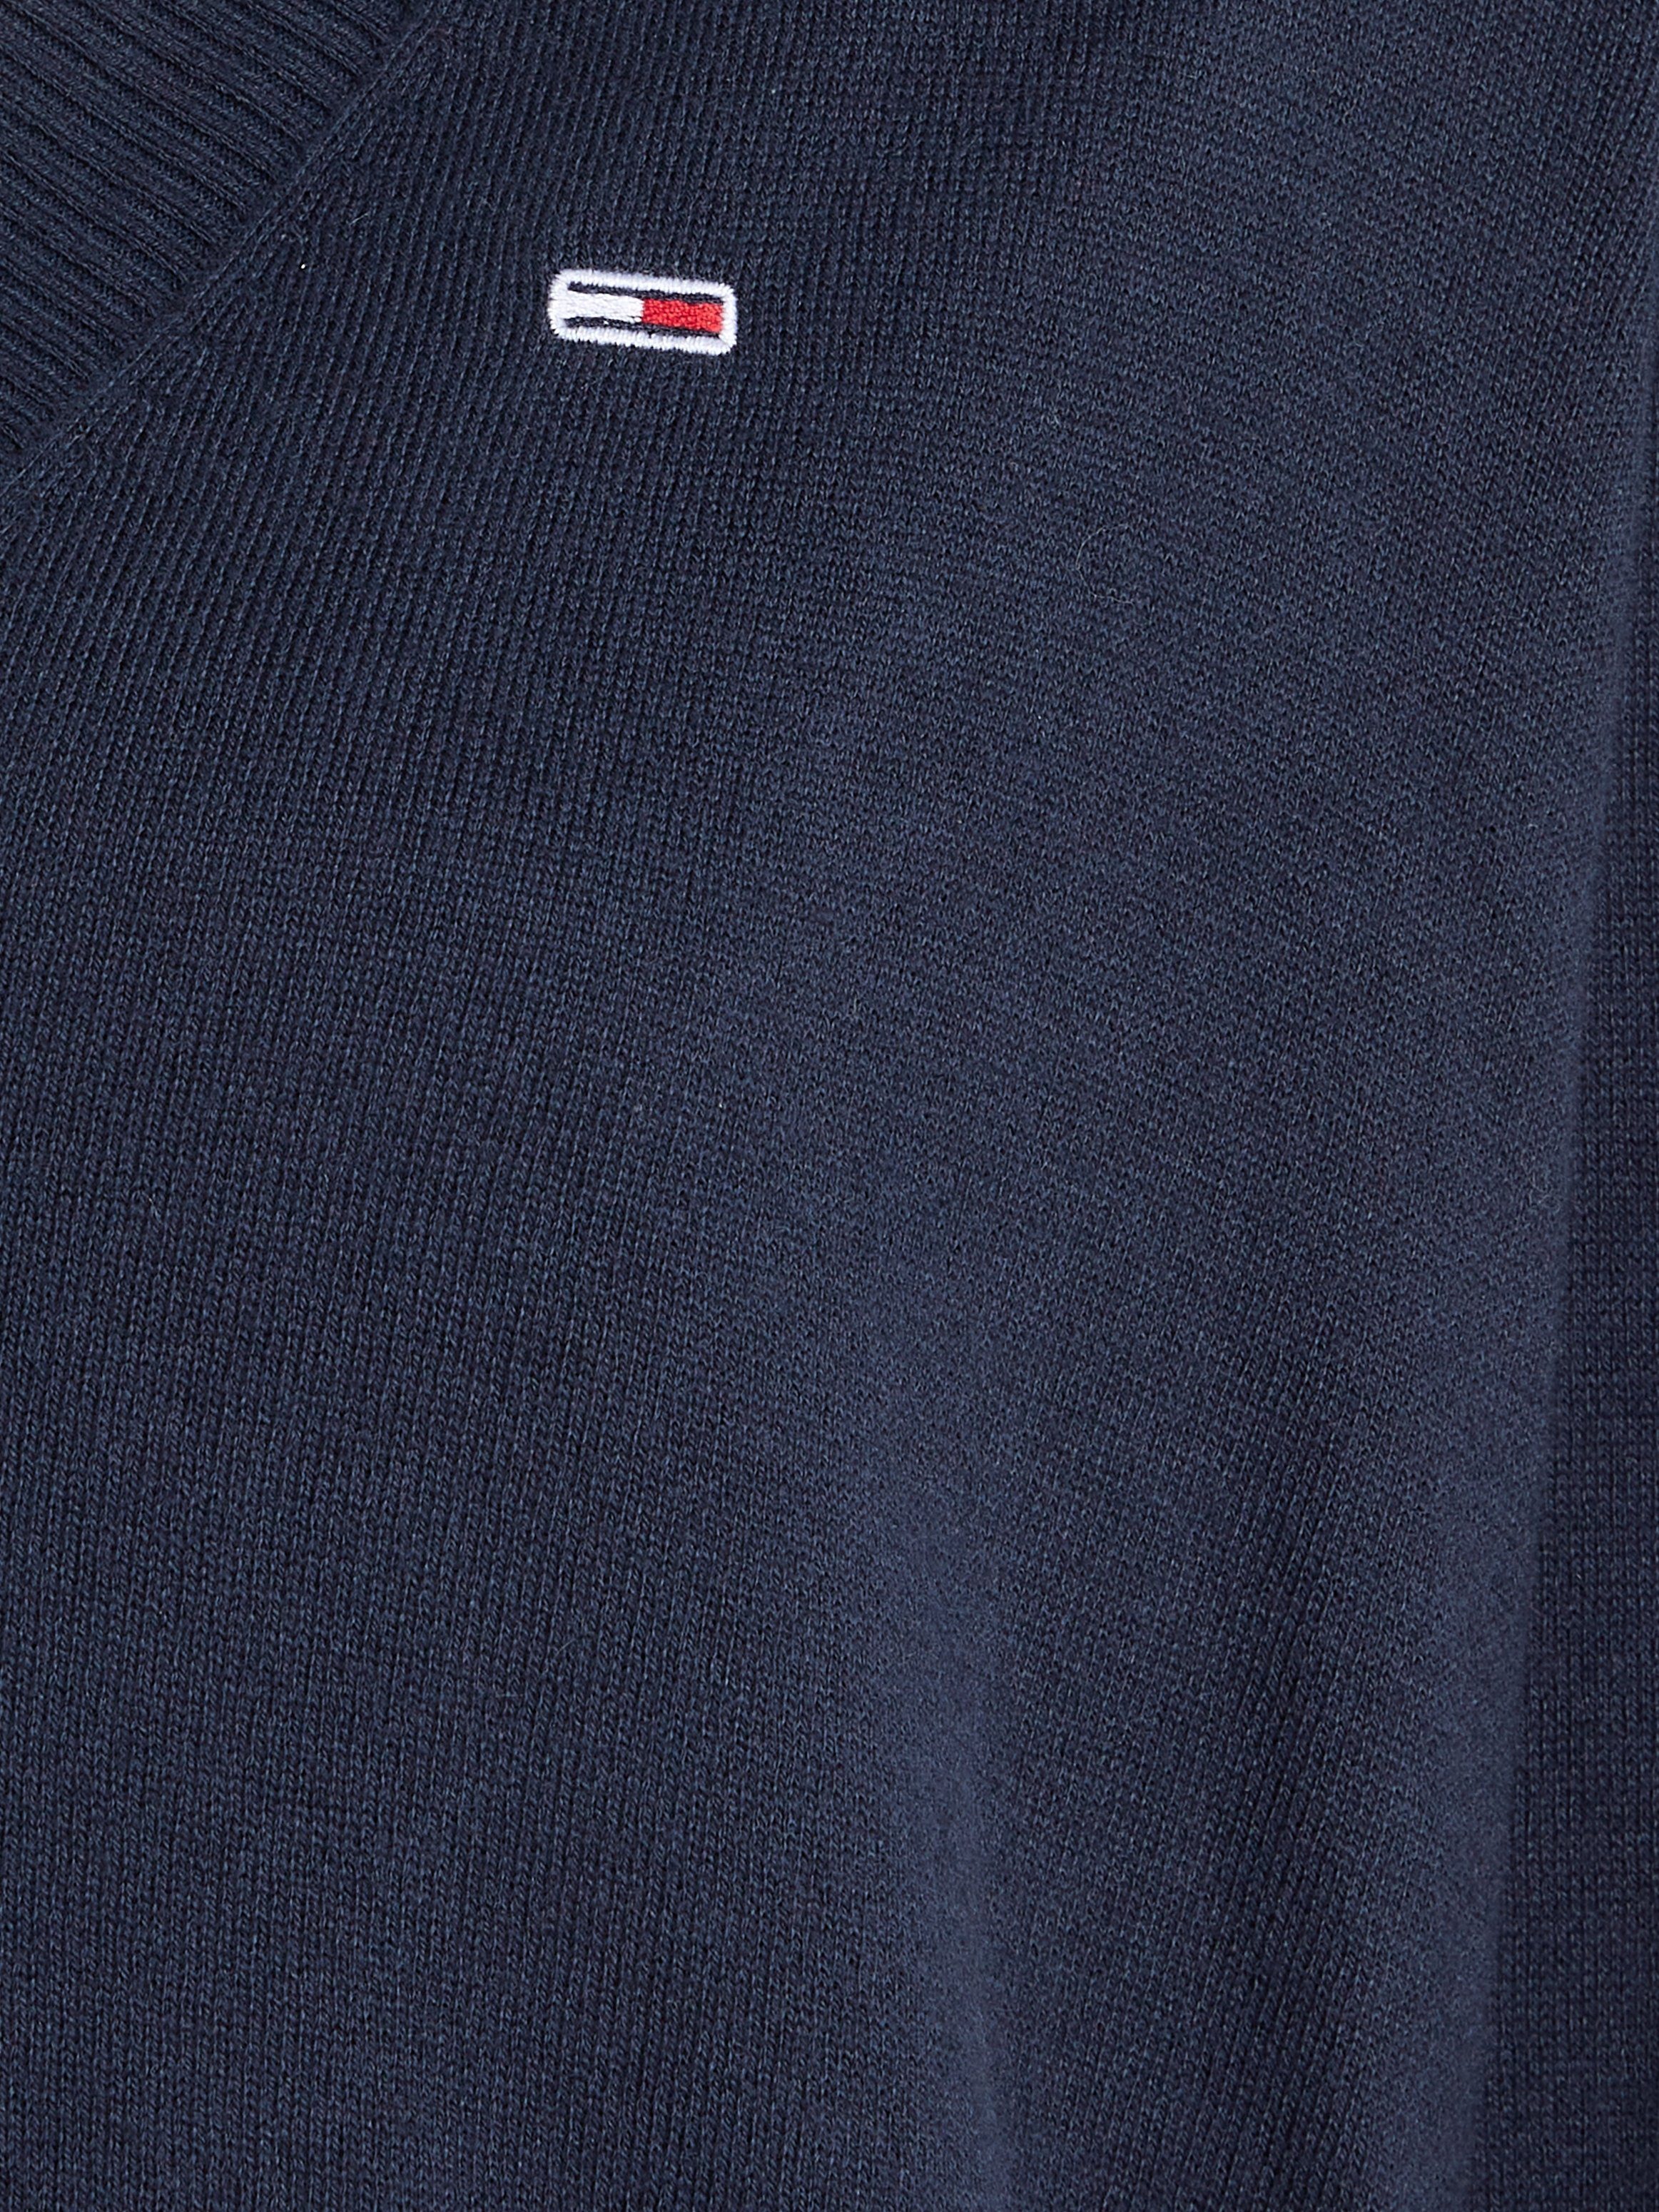 Twilight Navy SWEATER VNECK Jeans ESSENTIAL TJW Jeans V-Ausschnitt-Pullover Tommy Markenlabel Tommy mit